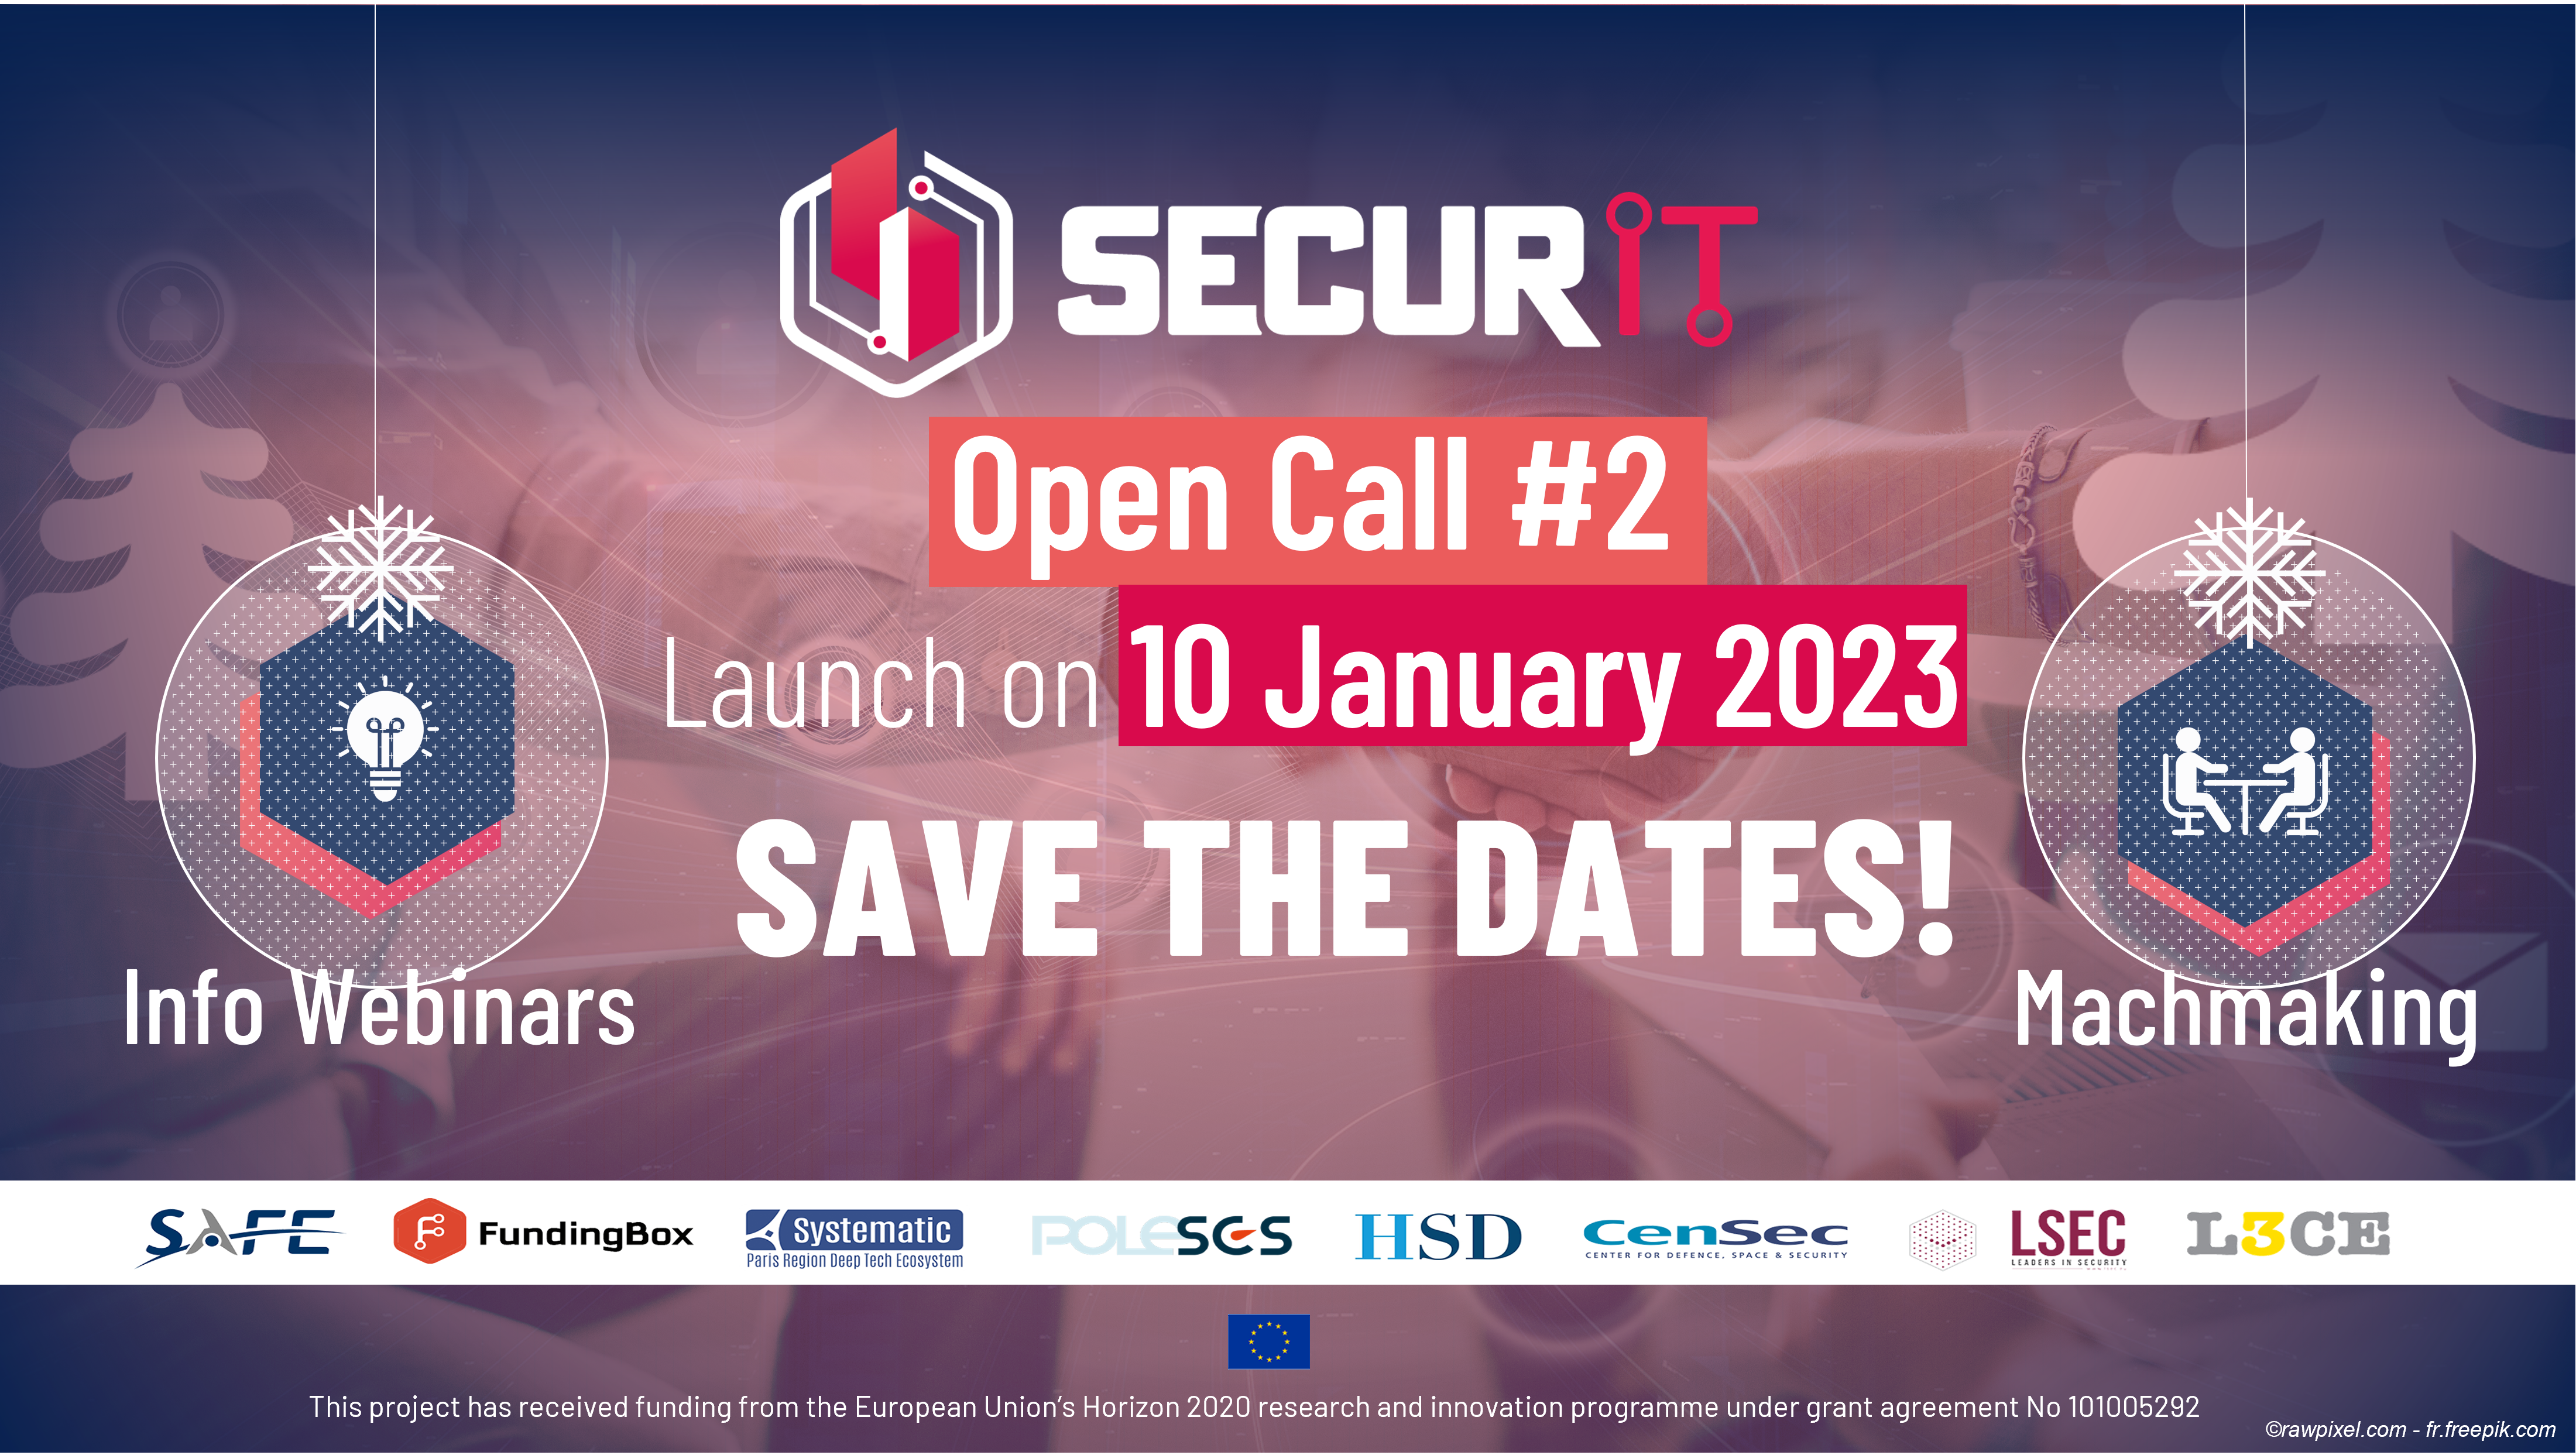 SecurIT Open Call #2 Launch 10/01/2023 STD